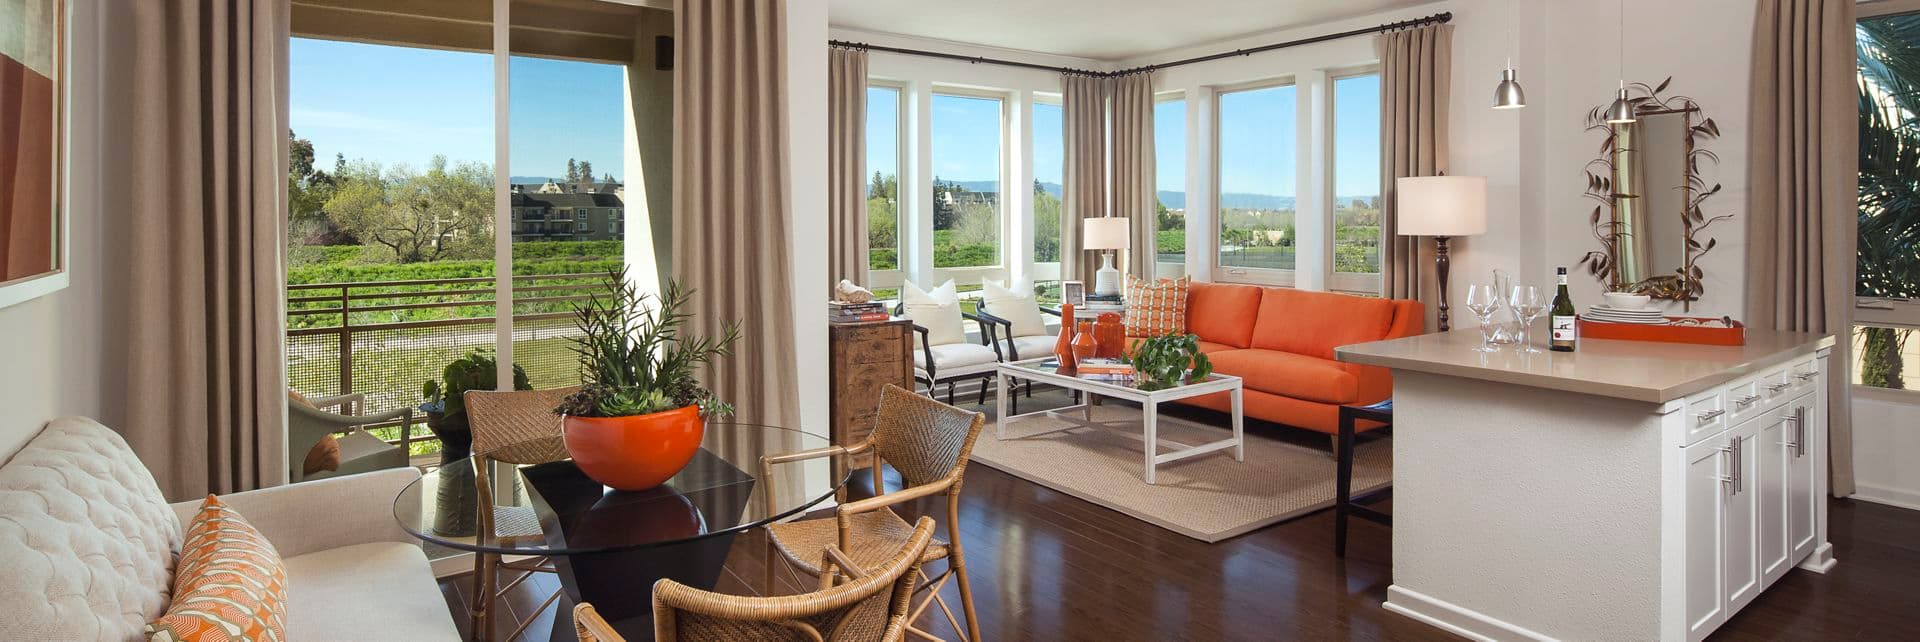 Interior view of living room and dining room at River View Apartment Homes in San Jose, CA.